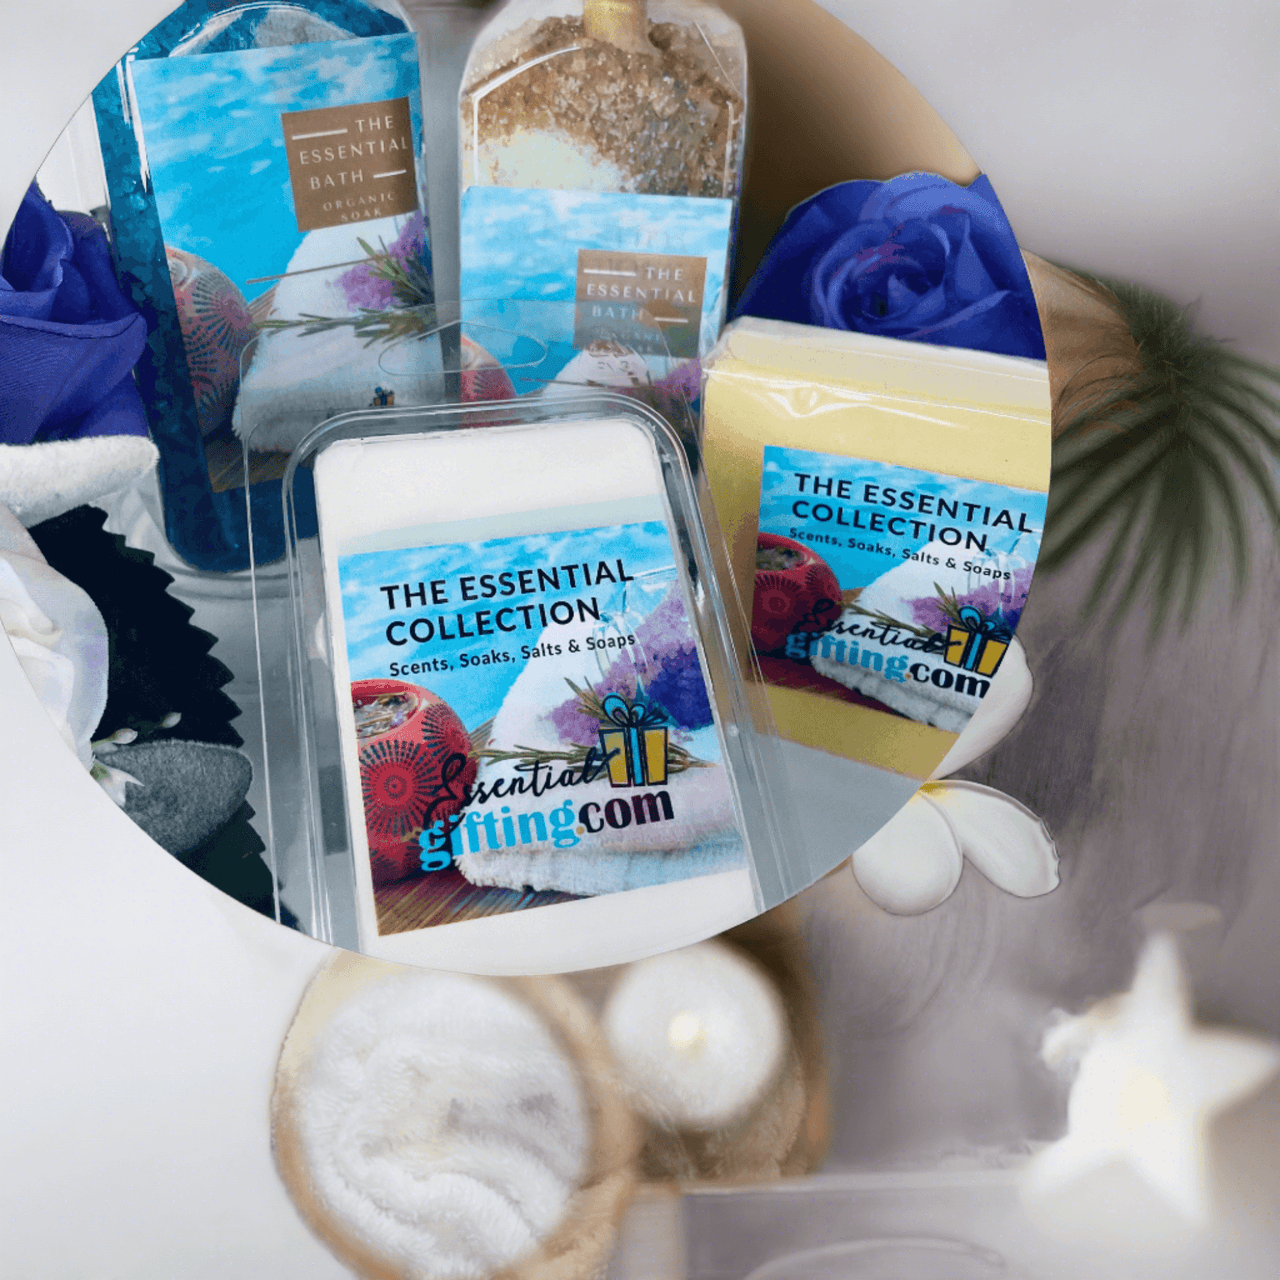 Luxurious bath care gift box with artisanal bath salts, sponges, and relaxing accessories - the ultimate pampering experience.